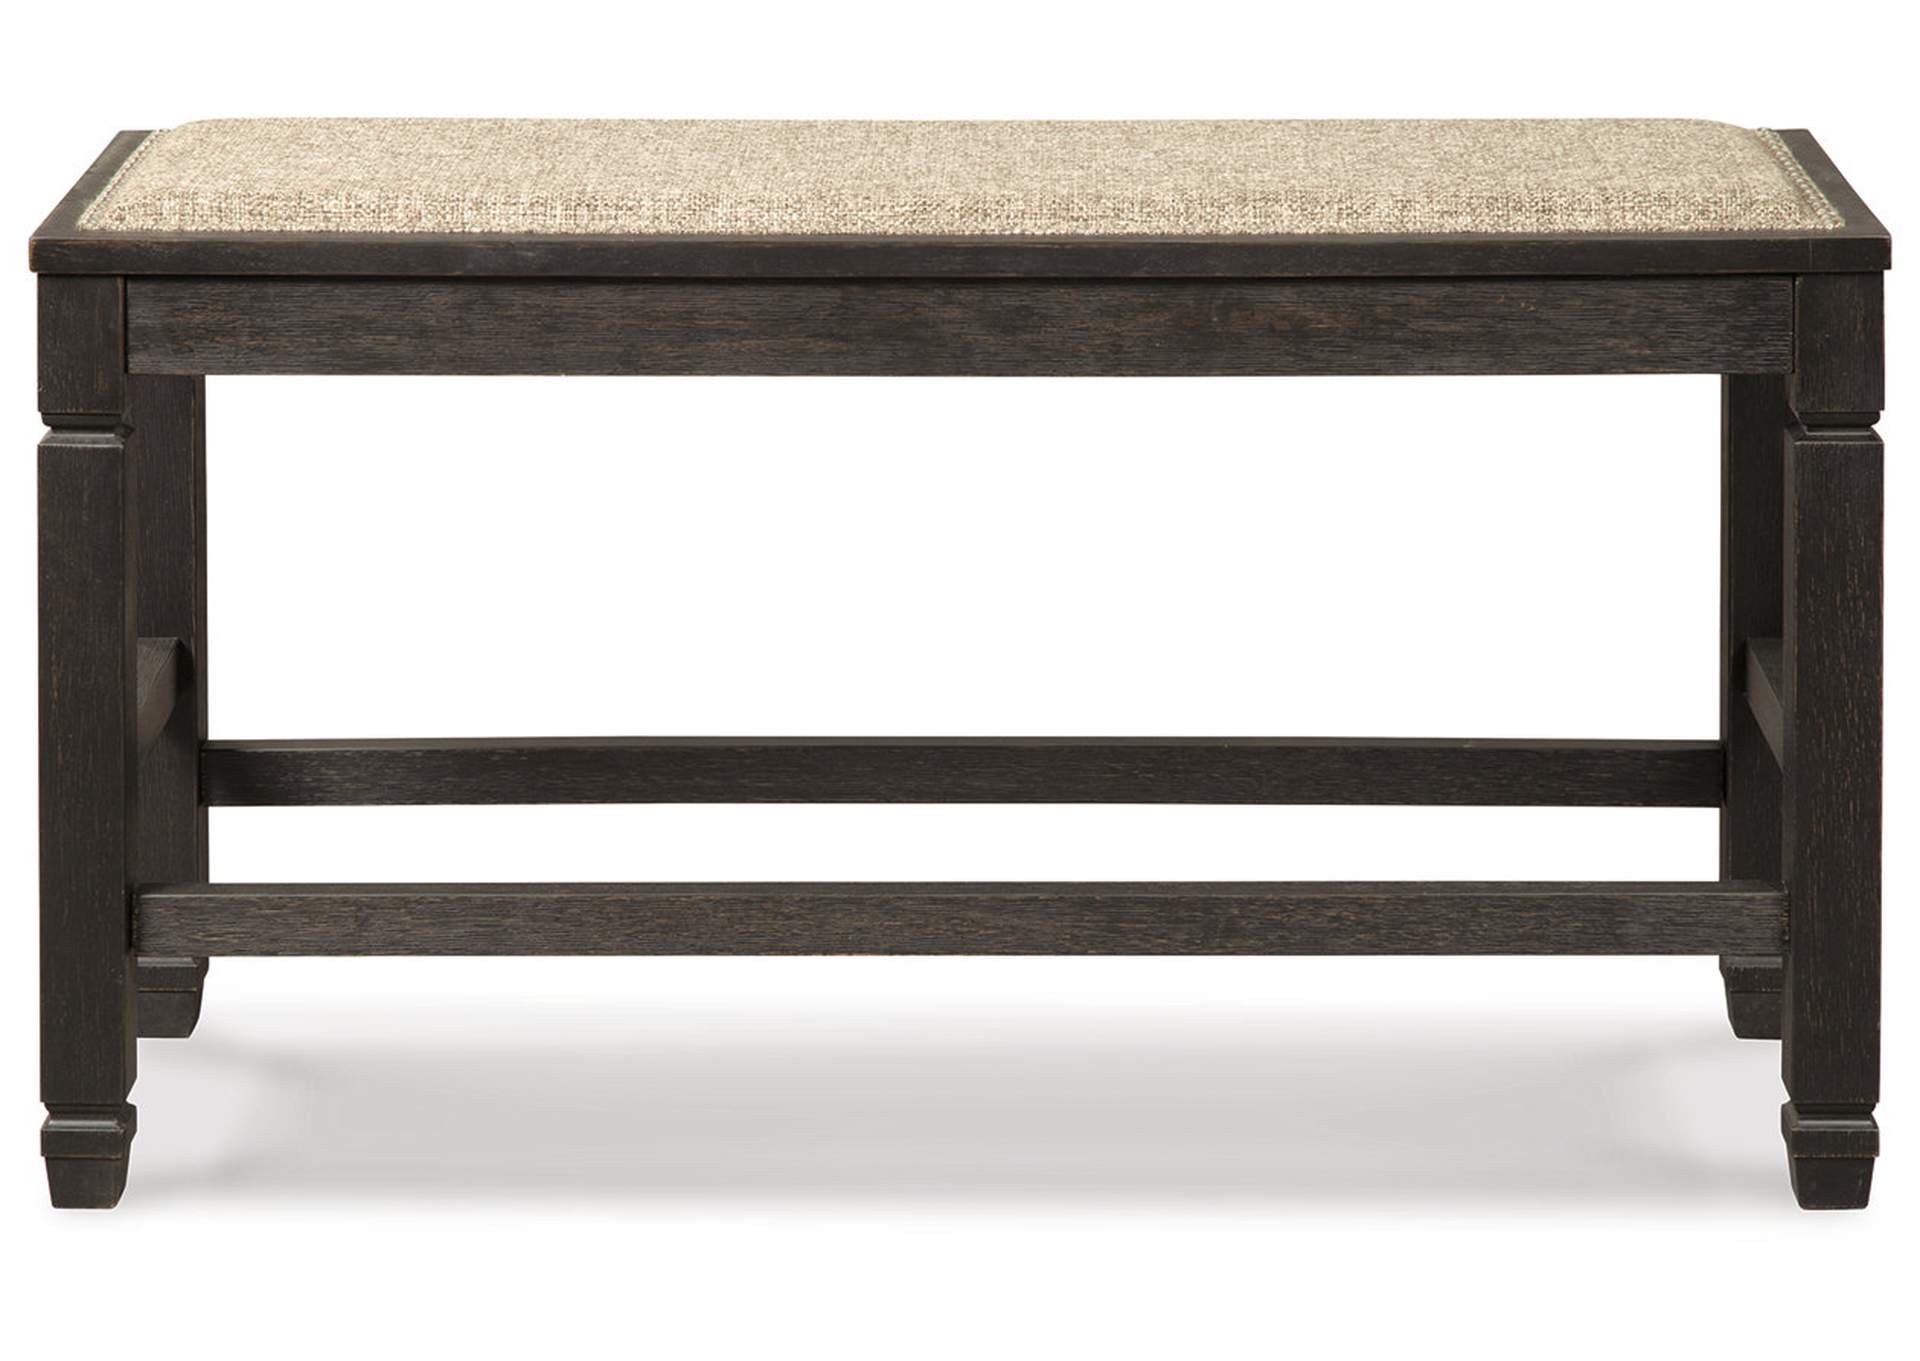 Tyler Creek Counter Height Dining Bench,Signature Design By Ashley